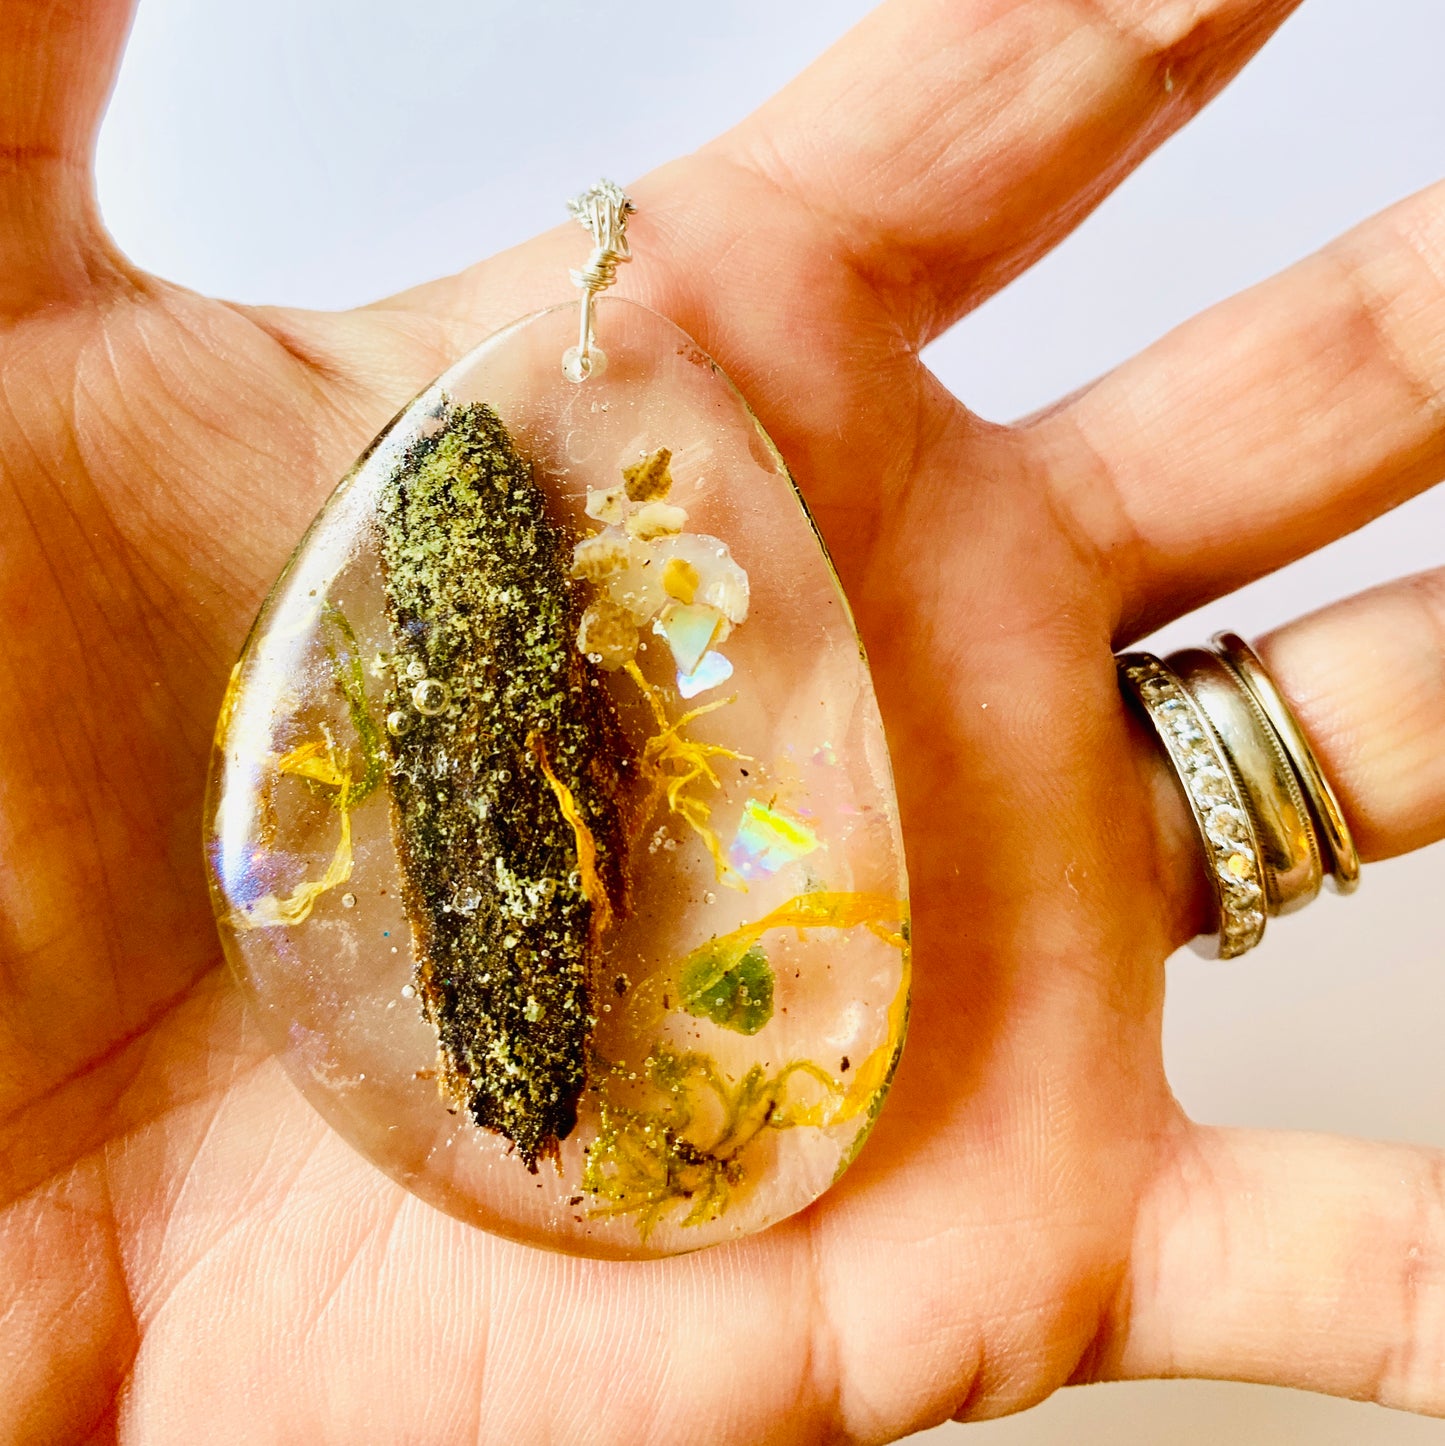 One Of a Kind Healing Resin Terrarium Necklace